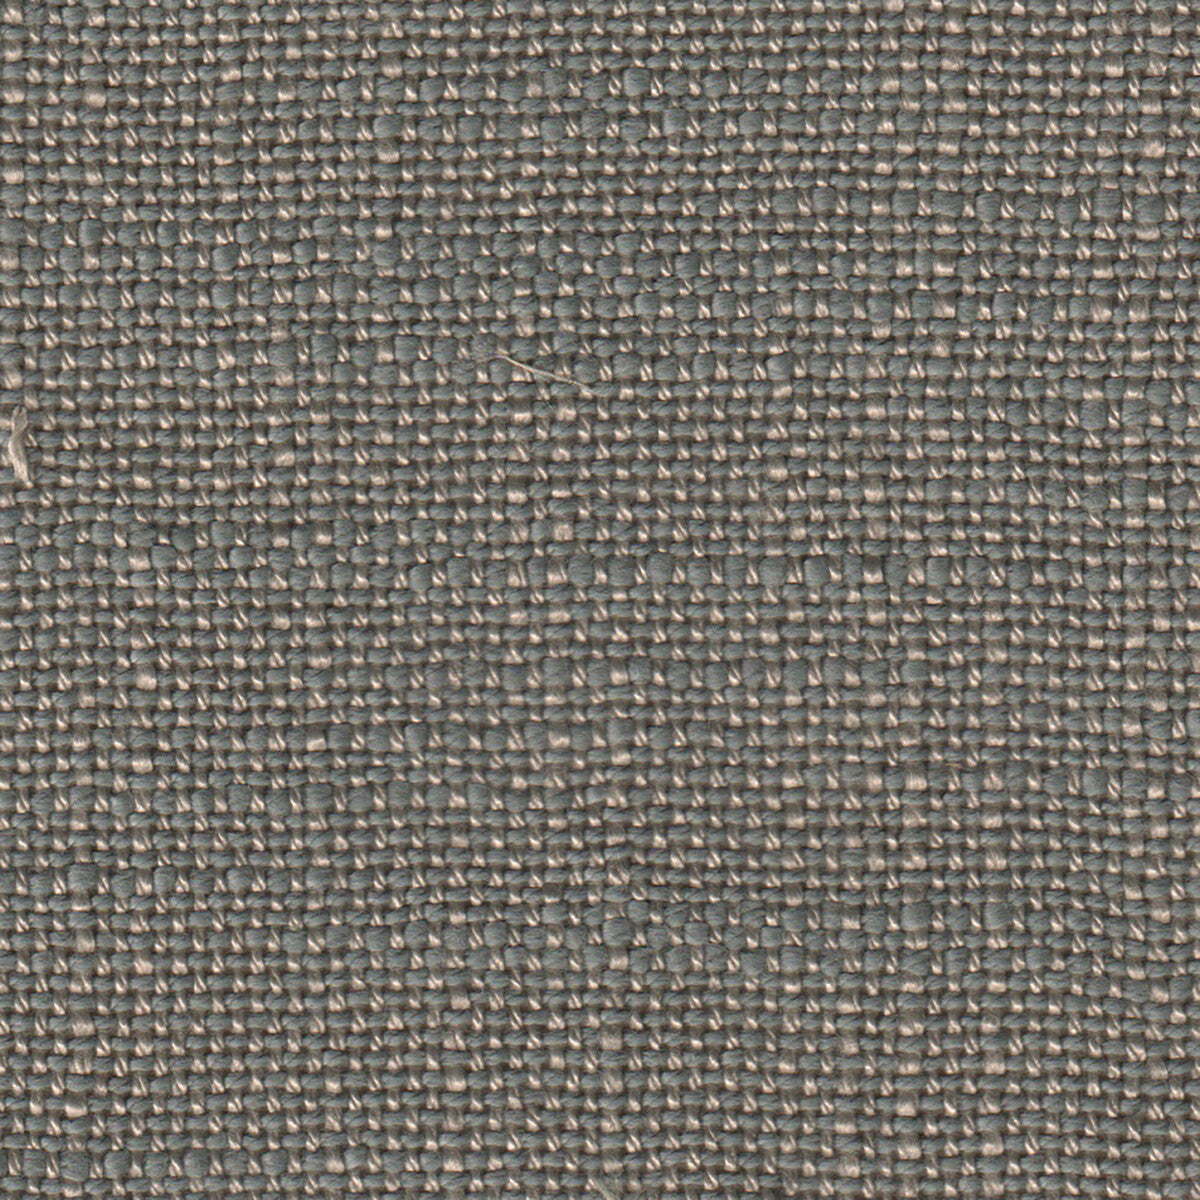 Kravet Contract fabric in 34633-11 color - pattern 34633.11.0 - by Kravet Contract in the Crypton Incase collection